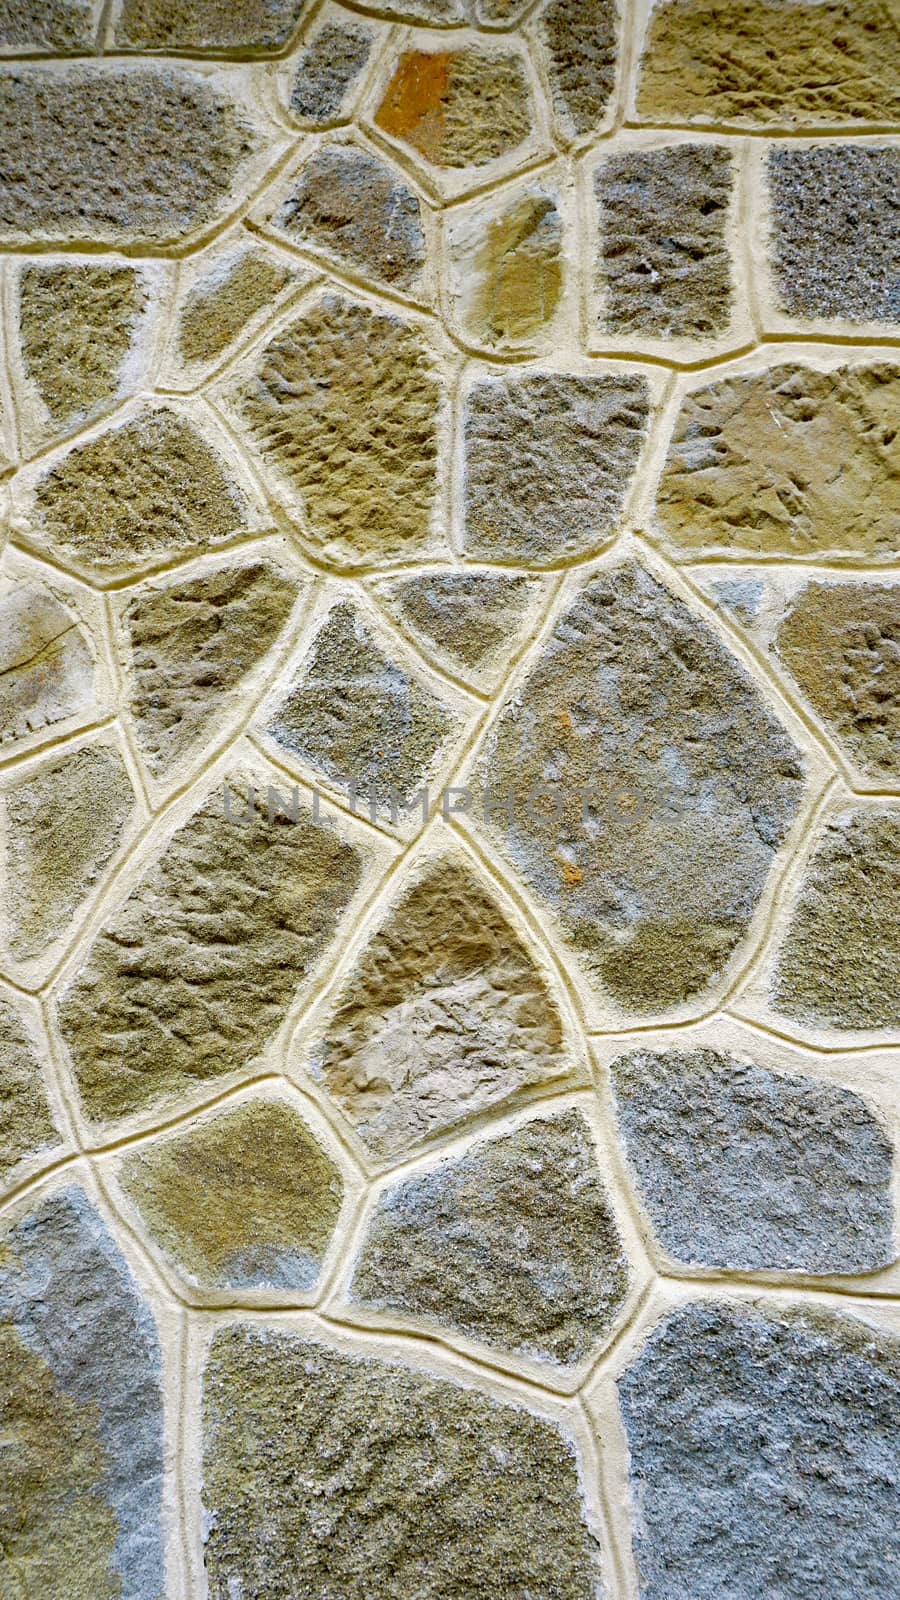 rough wall stone texture close up vertical